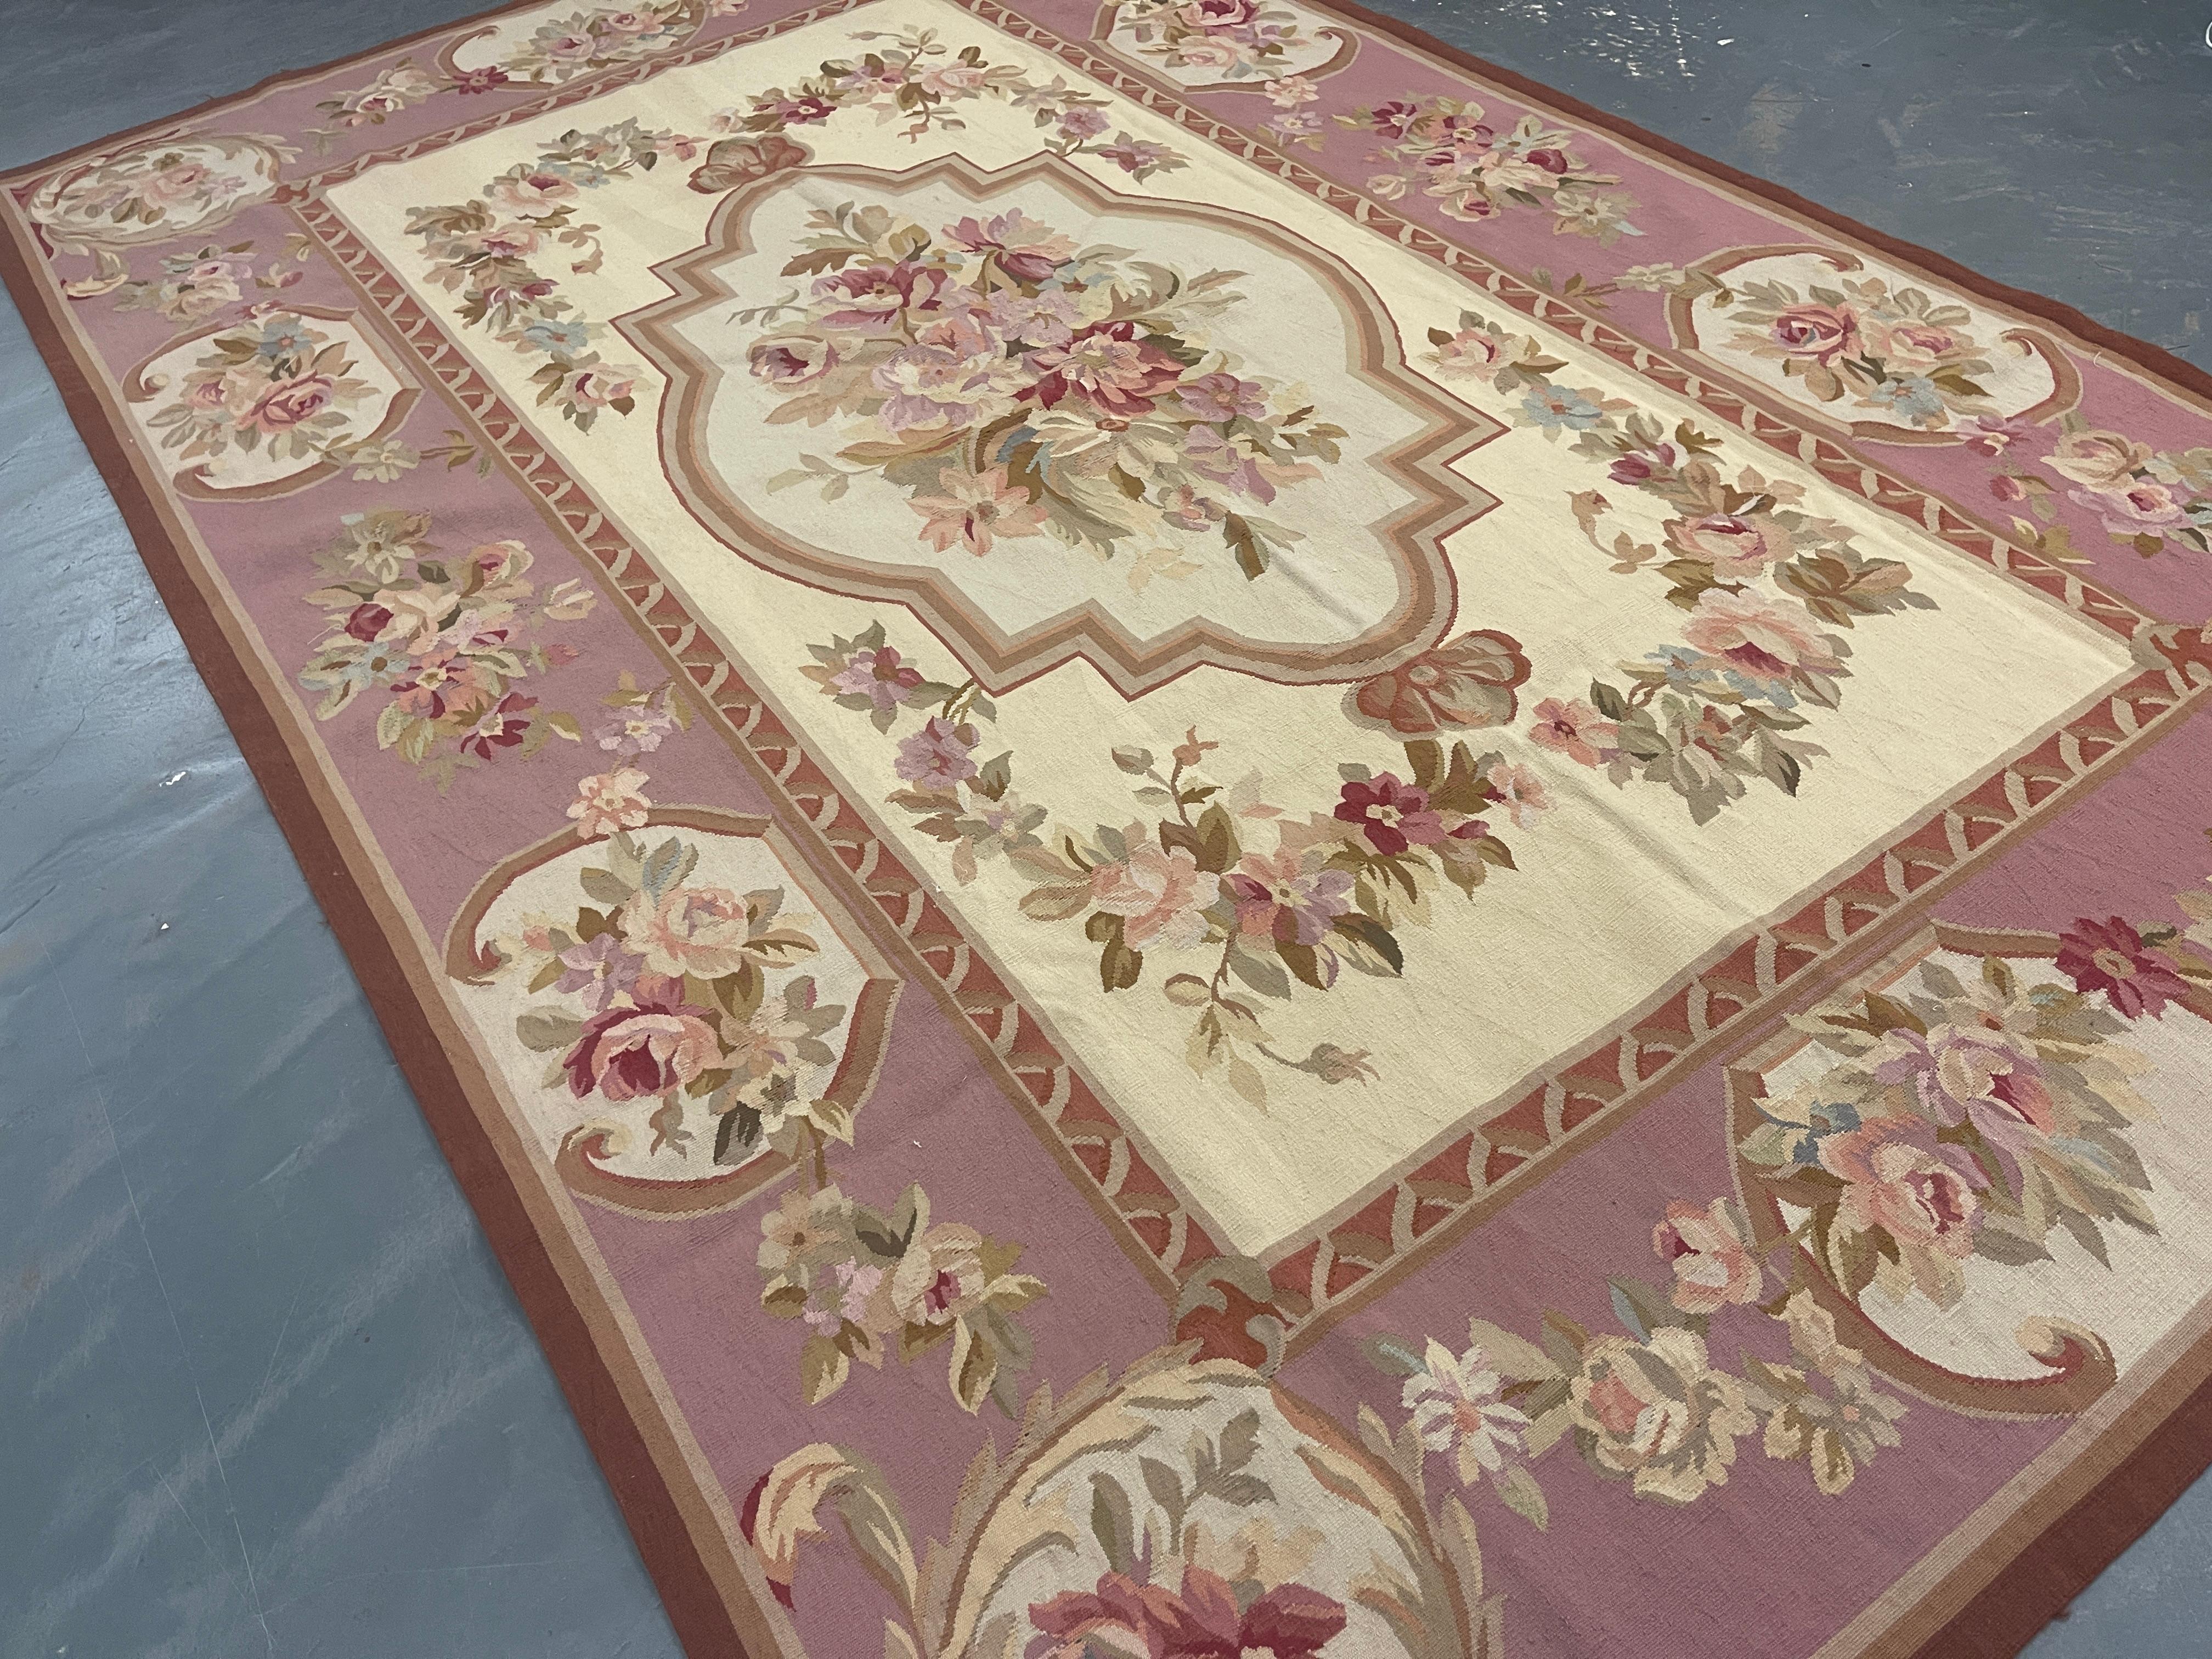 This fantastic area rug has been handwoven with a beautiful symmetrical floral design woven on an ivory blue background with cream green and ivory accents. This elegant piece's colour and design make it the perfect accent rug.
This style of rugs is